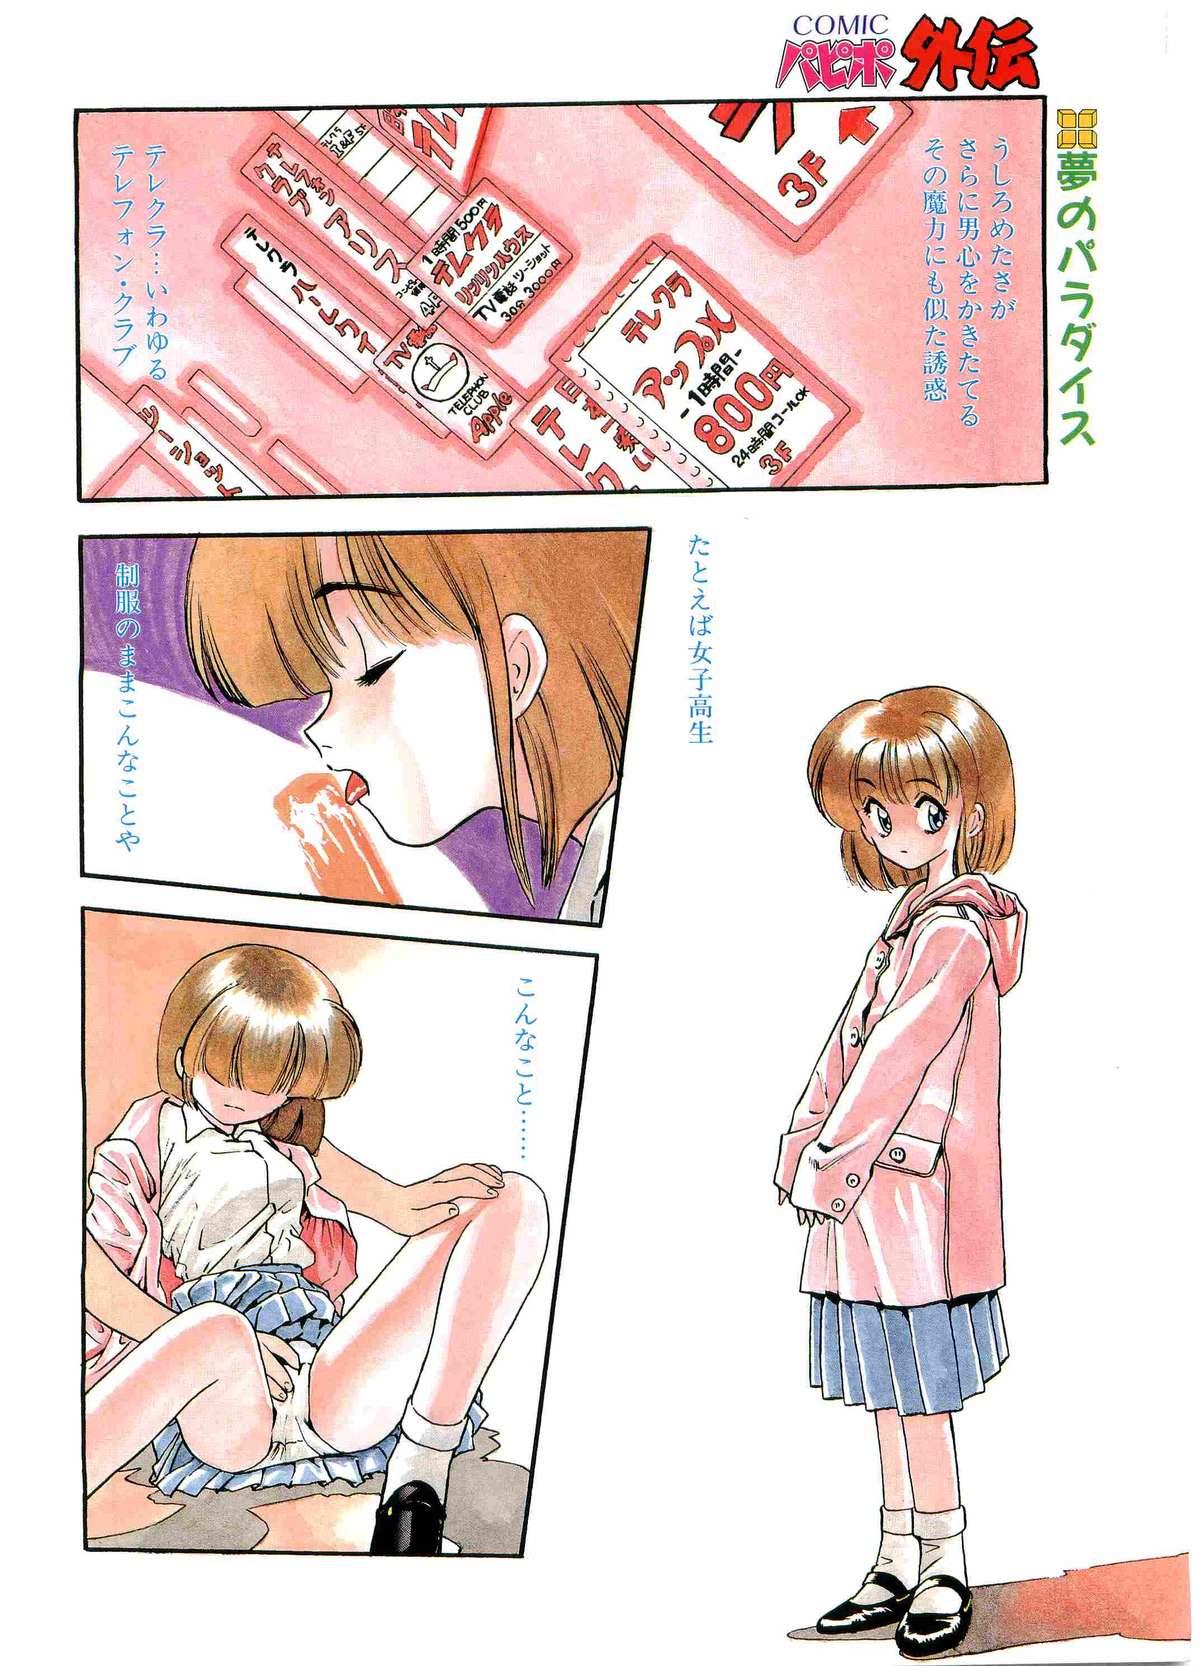 Asia COMIC Papipo Gaiden 1995-03 Gets - Page 4